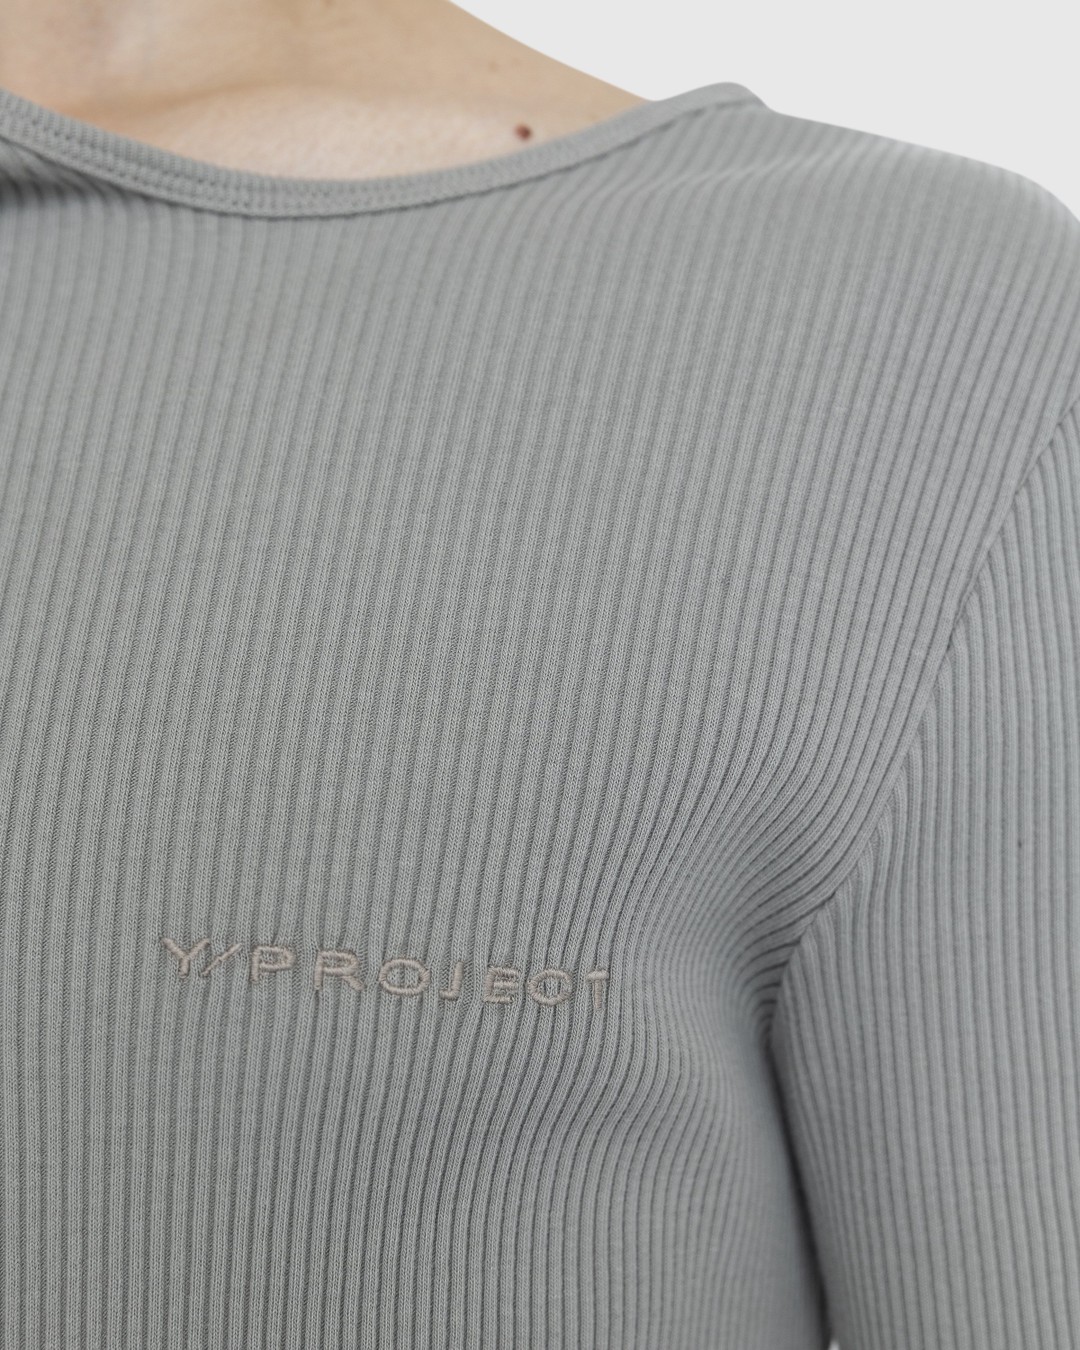 Y/Project – Classic Double Collar T-Shirt Taupe - Longsleeves - Grey - Image 7